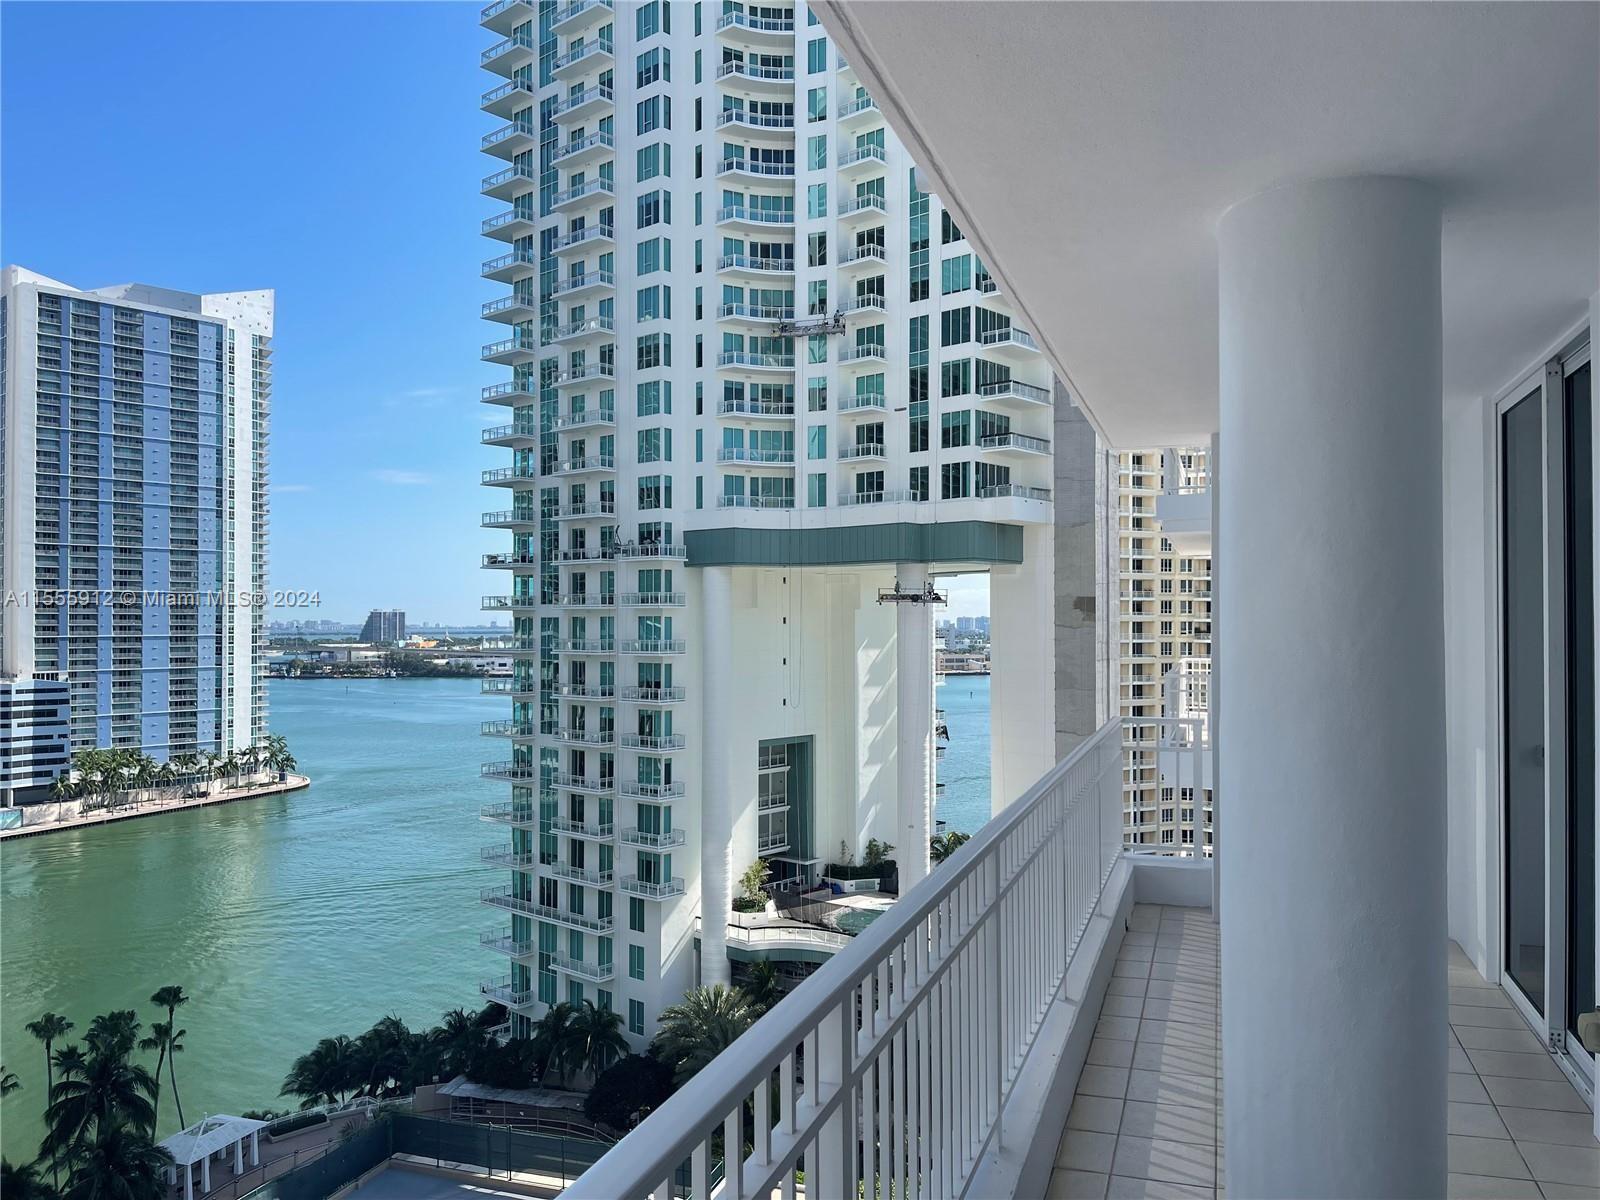 Recently renovated (bedrooms, bathrooms, kitchen and hardwood flooring) Line 10 unit, with breathtaking views to the emblematic Miami river, downtown and sobe. Its north orientation is ideal for withstanding the hot summer season and enjoying the mild winter months. Perhaps one of the most efficient layouts in the entire condominium. The kitchen area is ideal for cooking and entertaining guests with direct access to the terrace allow plenty of ventilation. The two bedrooms are on opposite sides, and one of them has a double door which allows for total privacy. Unit comes with 1 parking spot + 1 storage area. Enjoy 5 star amenities and the island style of living within walking distance to downtown Miami!